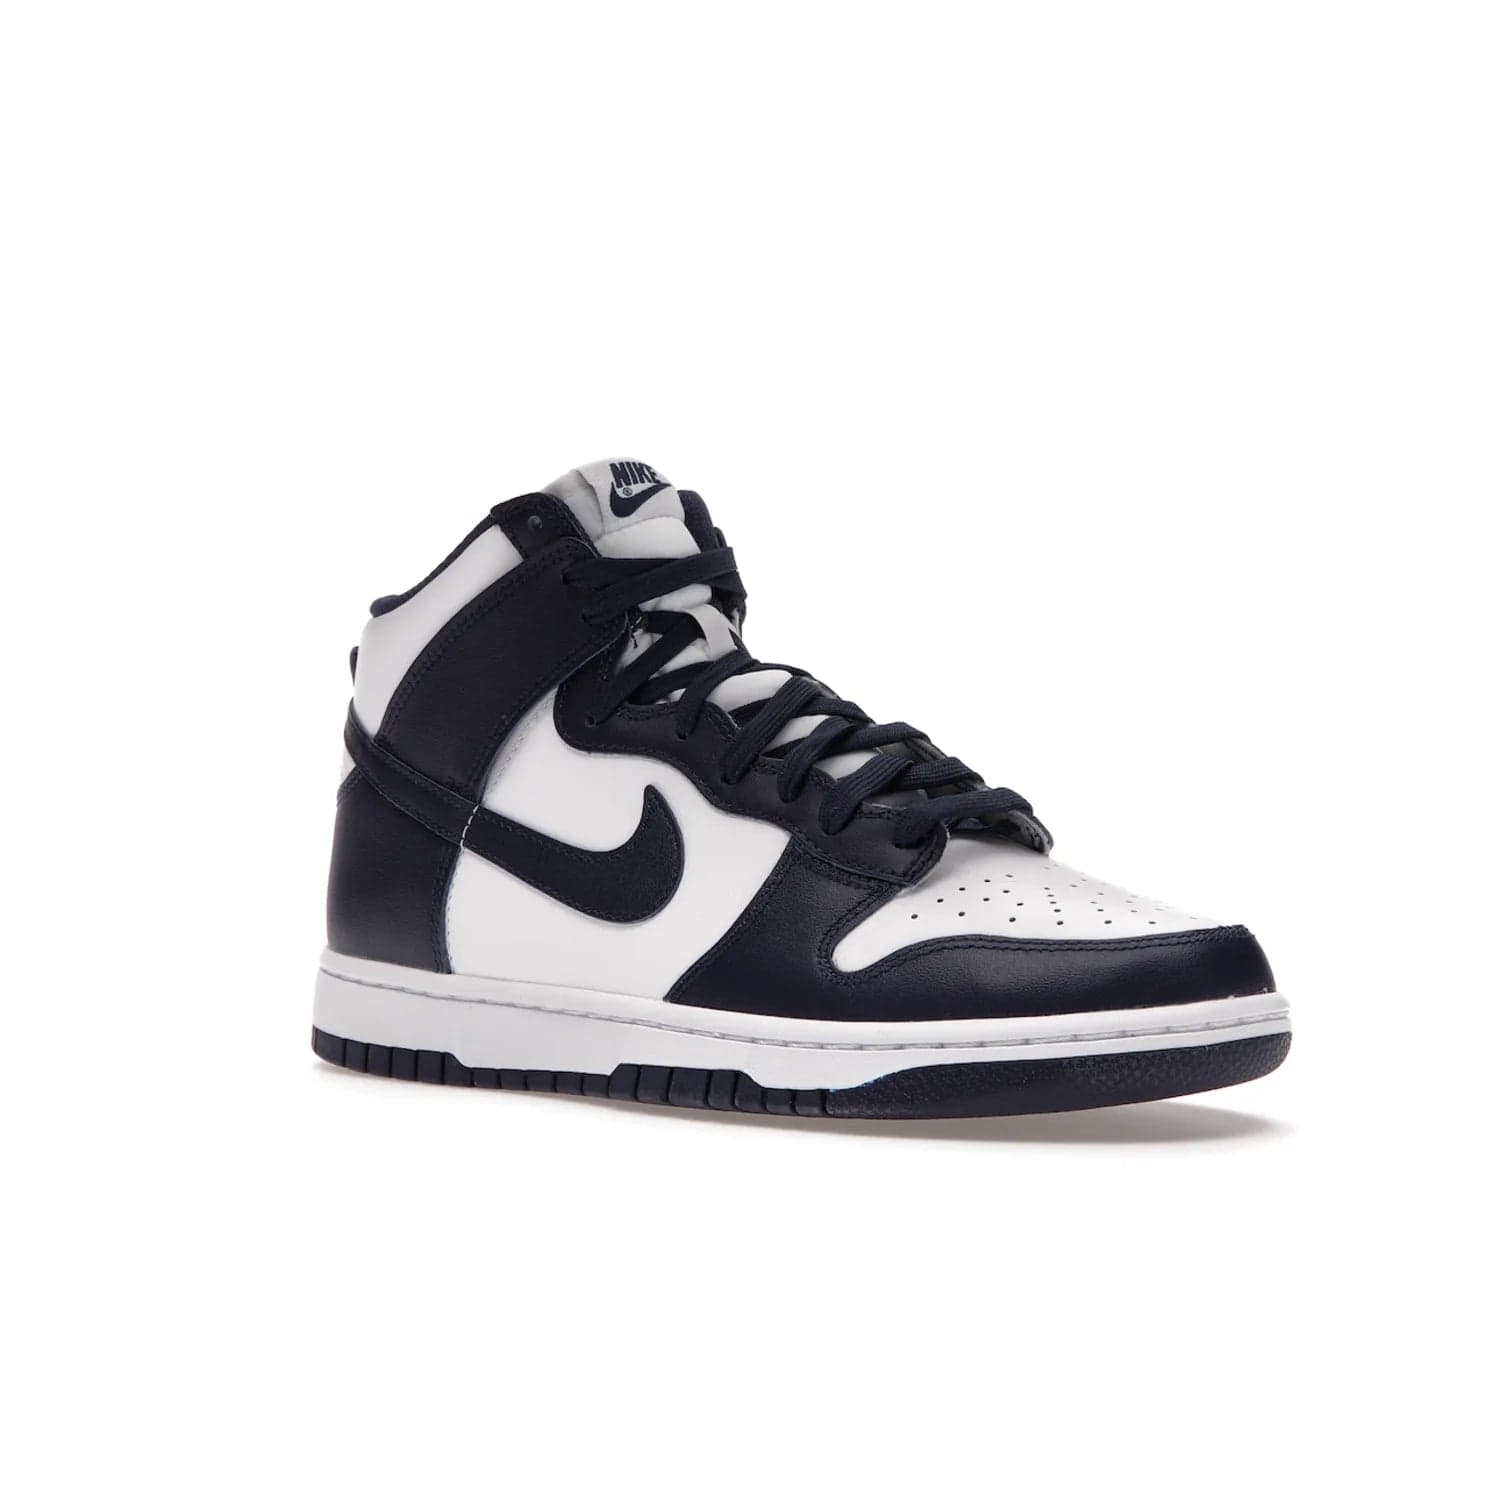 Nike Dunk High Championship Navy - Image 5 - Only at www.BallersClubKickz.com - Classic Nike Dunk High sneaker delivers an unforgettable style with white leather upper, Championship Navy overlays, and matching woven tongue label and sole. Make a statement with the Championship Navy today.